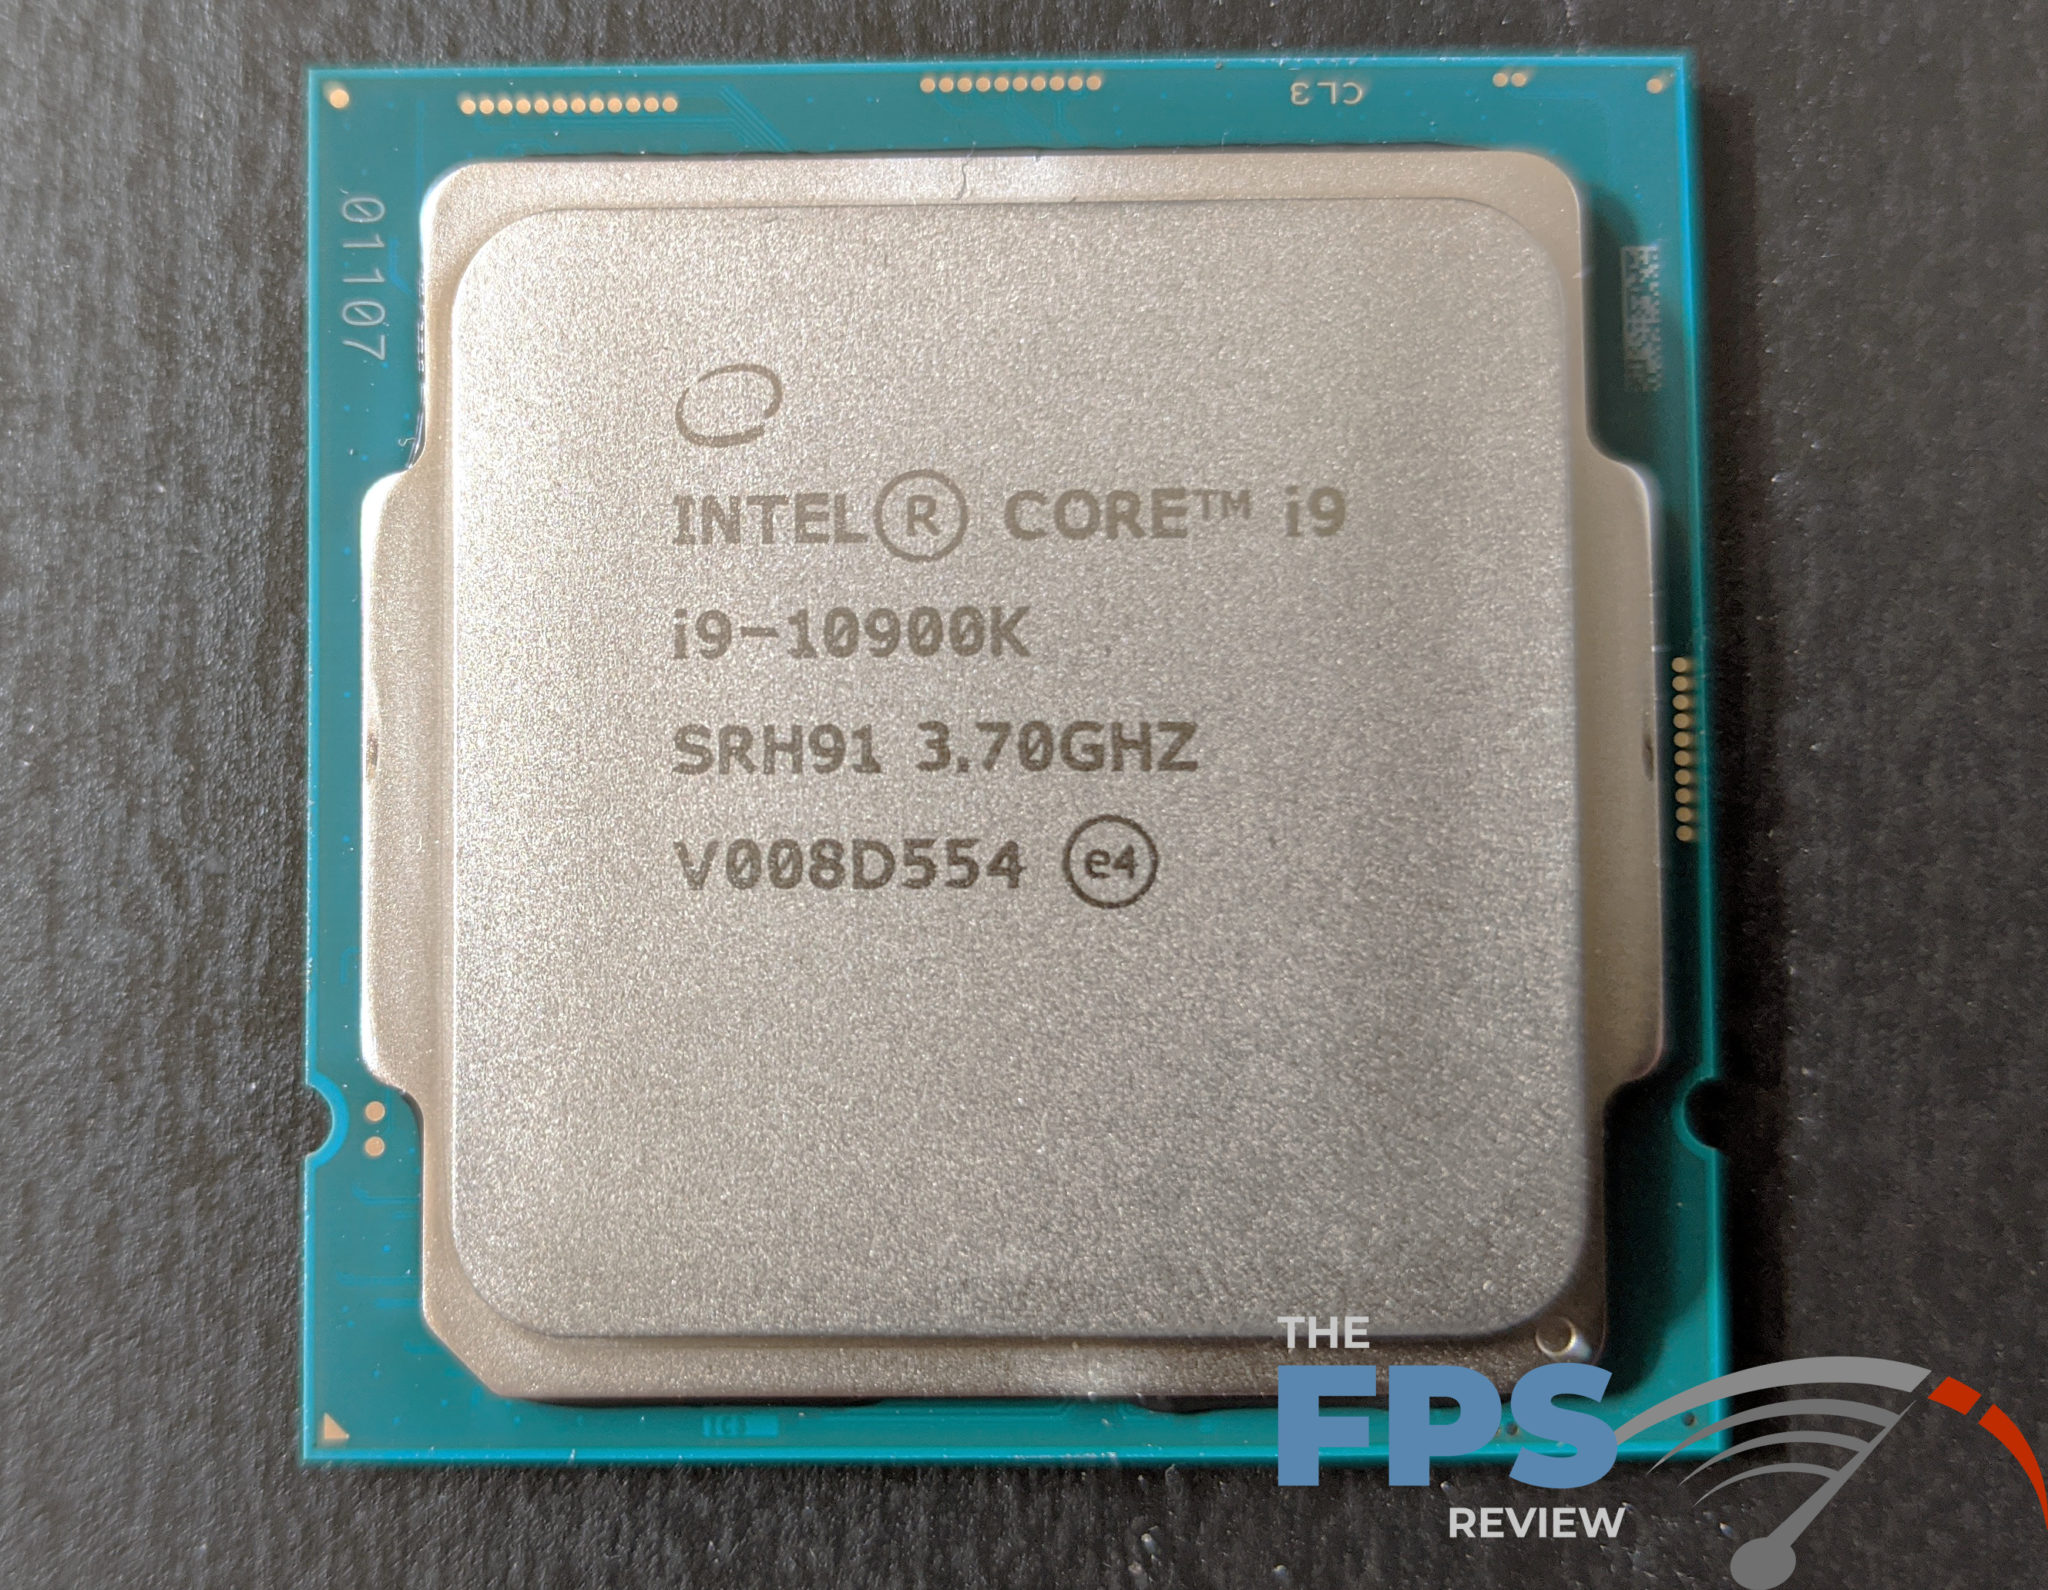 Intel Core i9-10900K CPU Review - Page 3 of 14